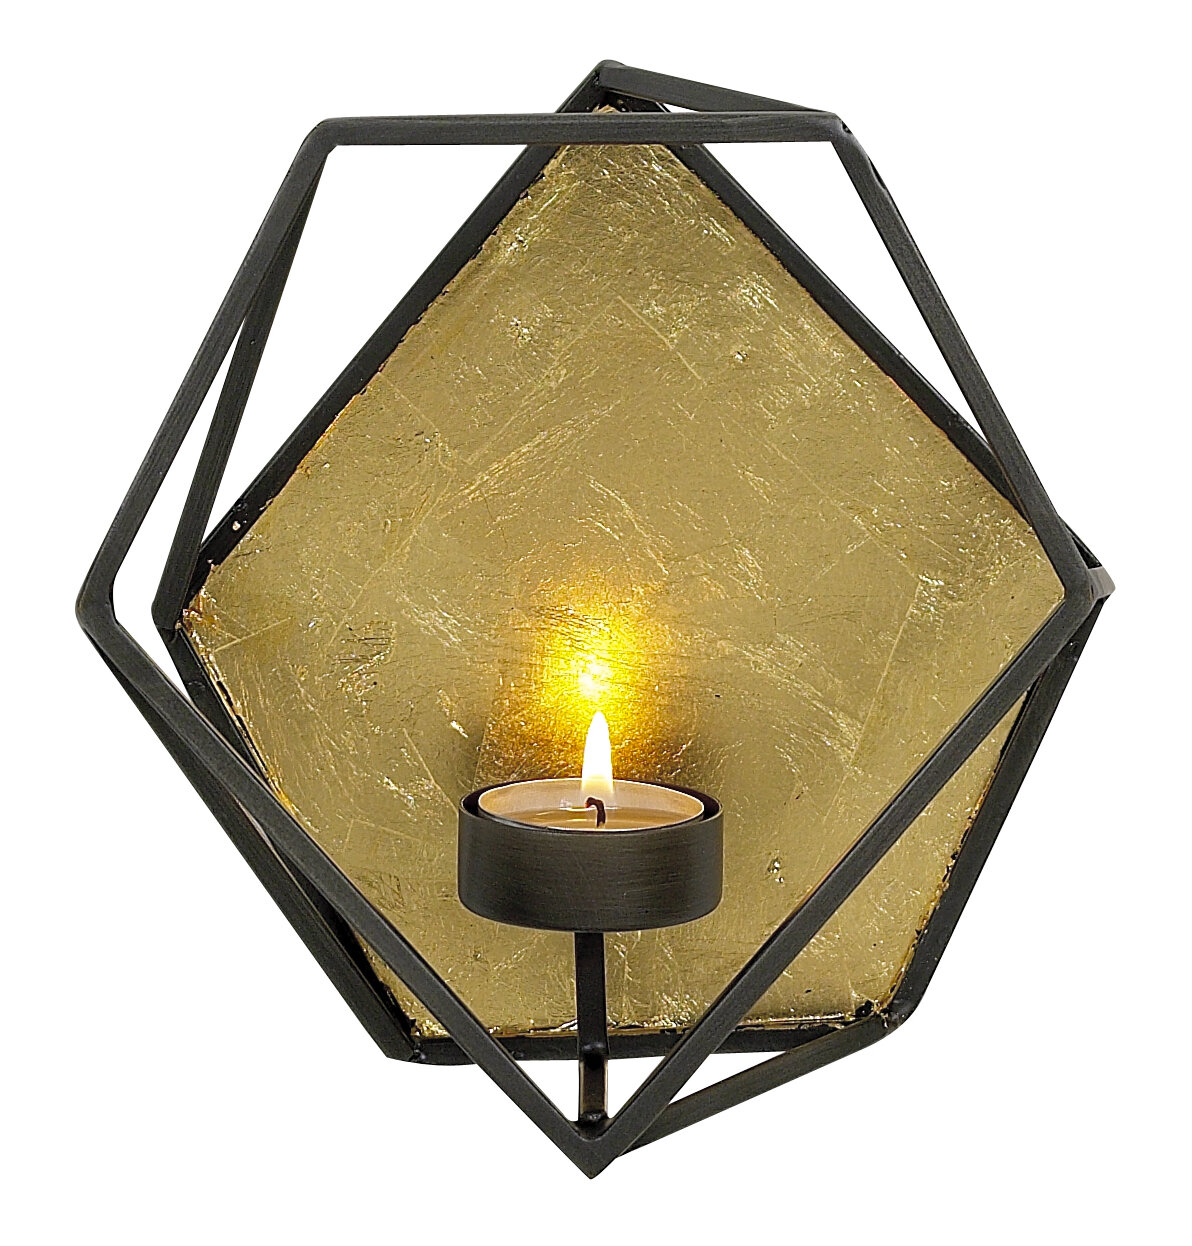 Geometric Tea Light Wall Candlestick Candle Holder for Wall Decoration_Gold 